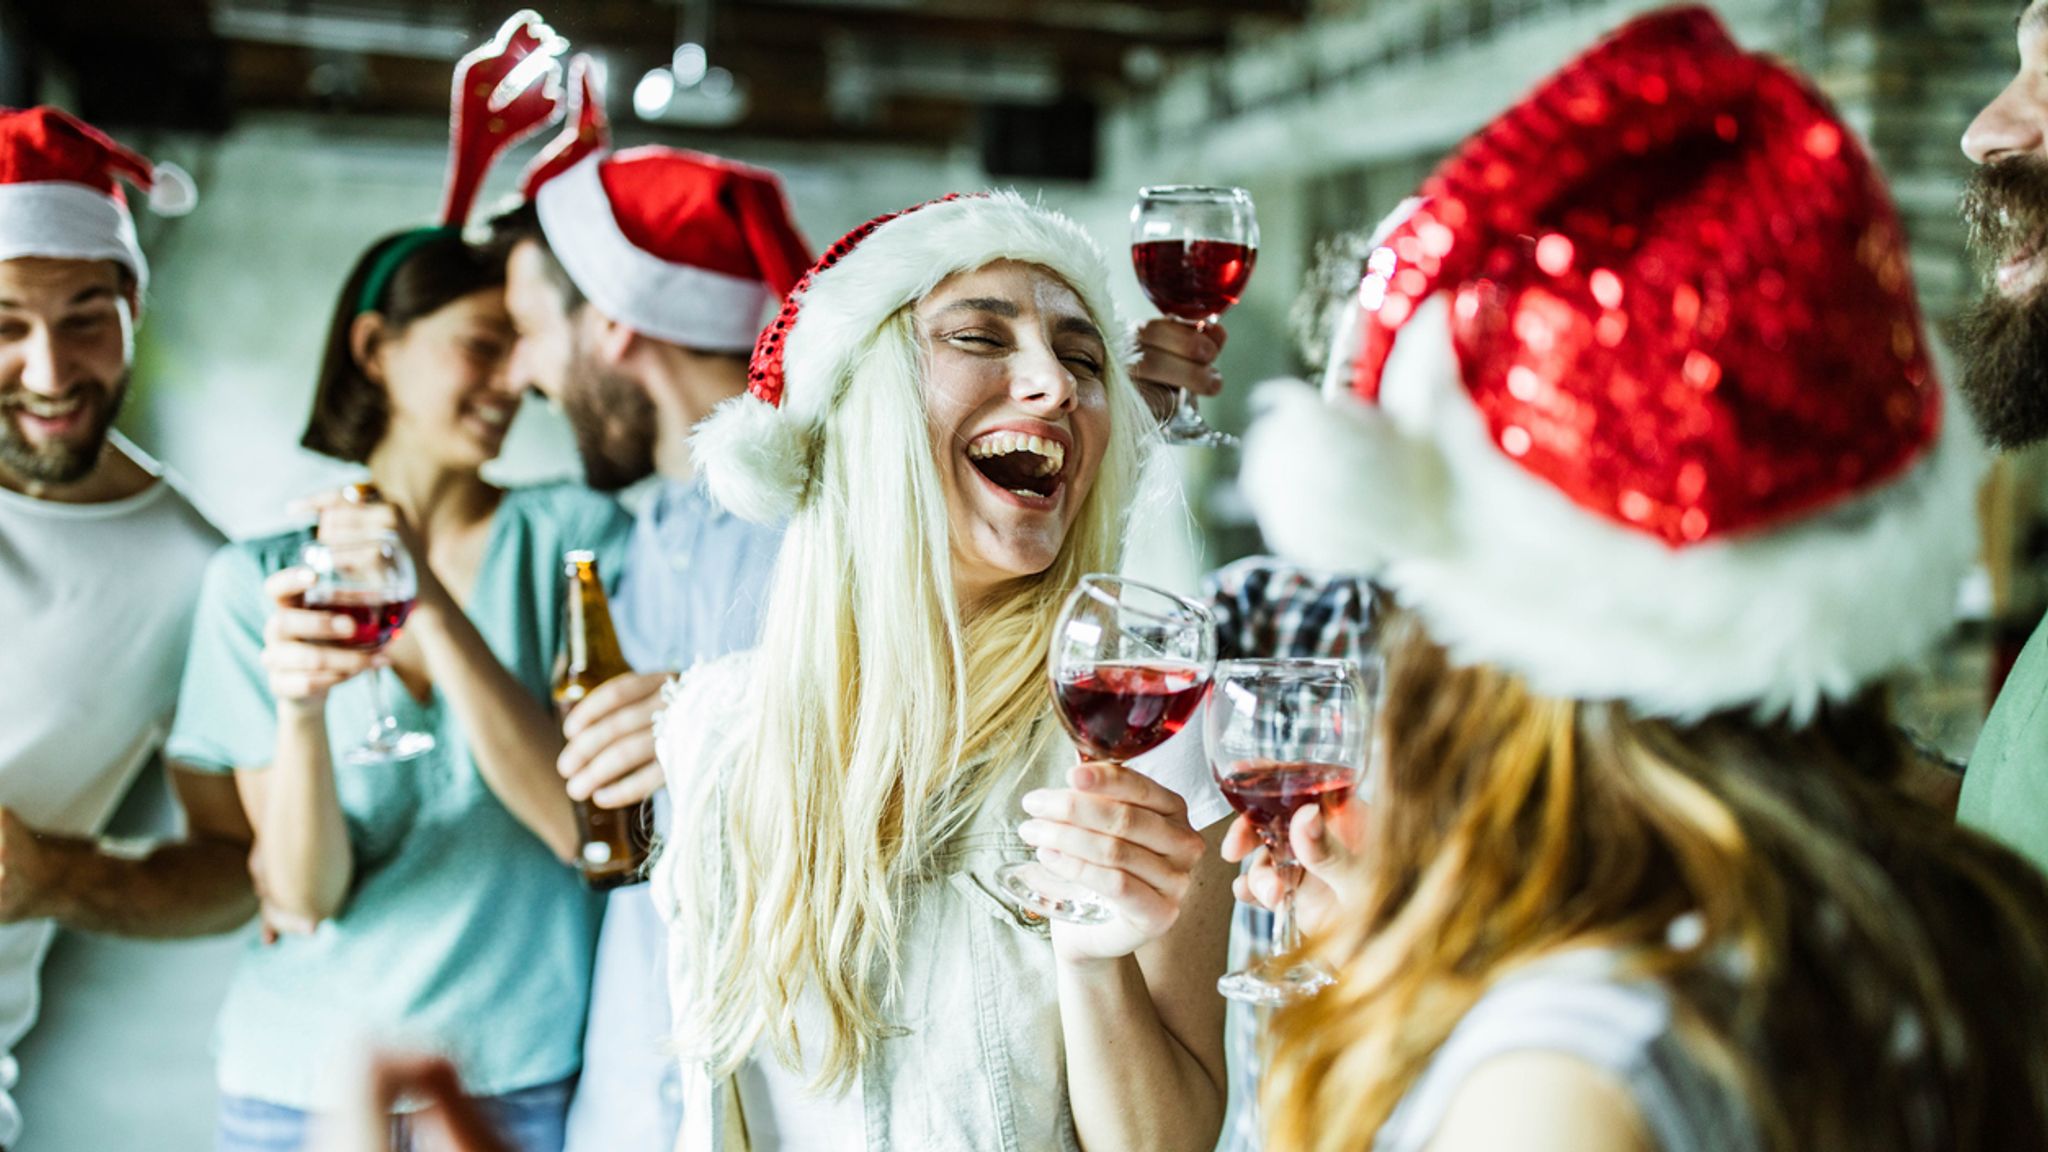 COVID-19: Office Christmas party 'dead for now' with staff opting for 'cash  instead', survey finds | UK News | Sky News